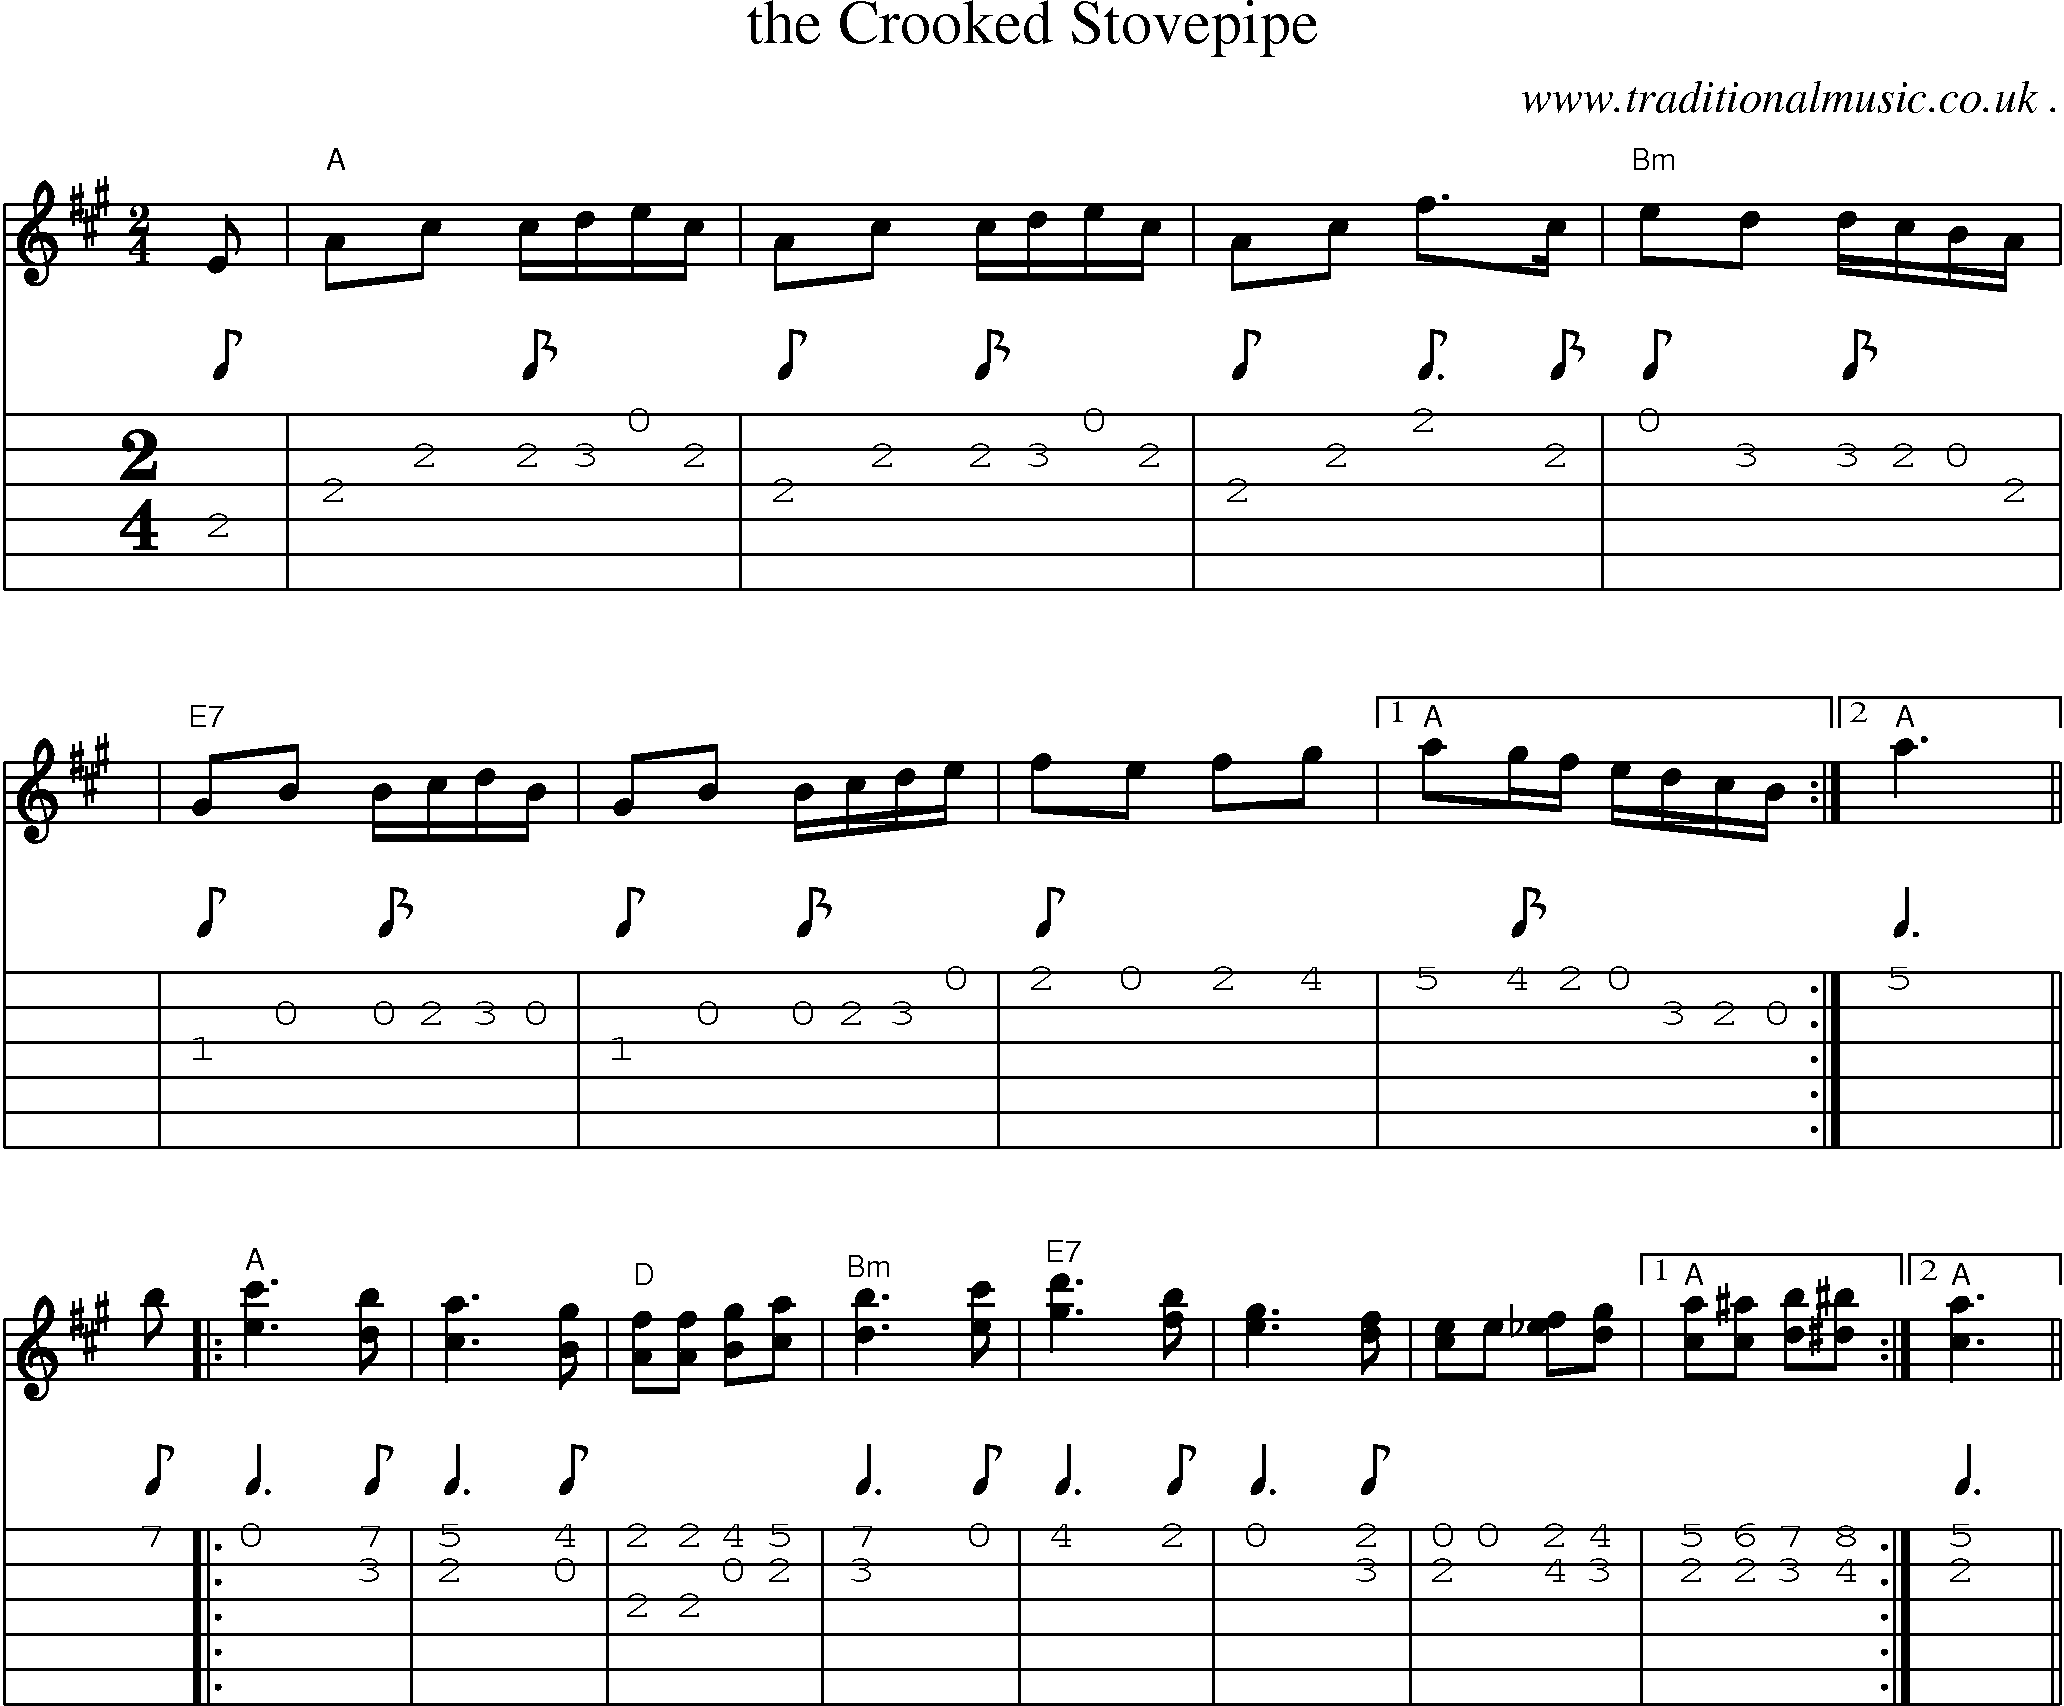 Sheet-Music and Guitar Tabs for The Crooked Stovepipe